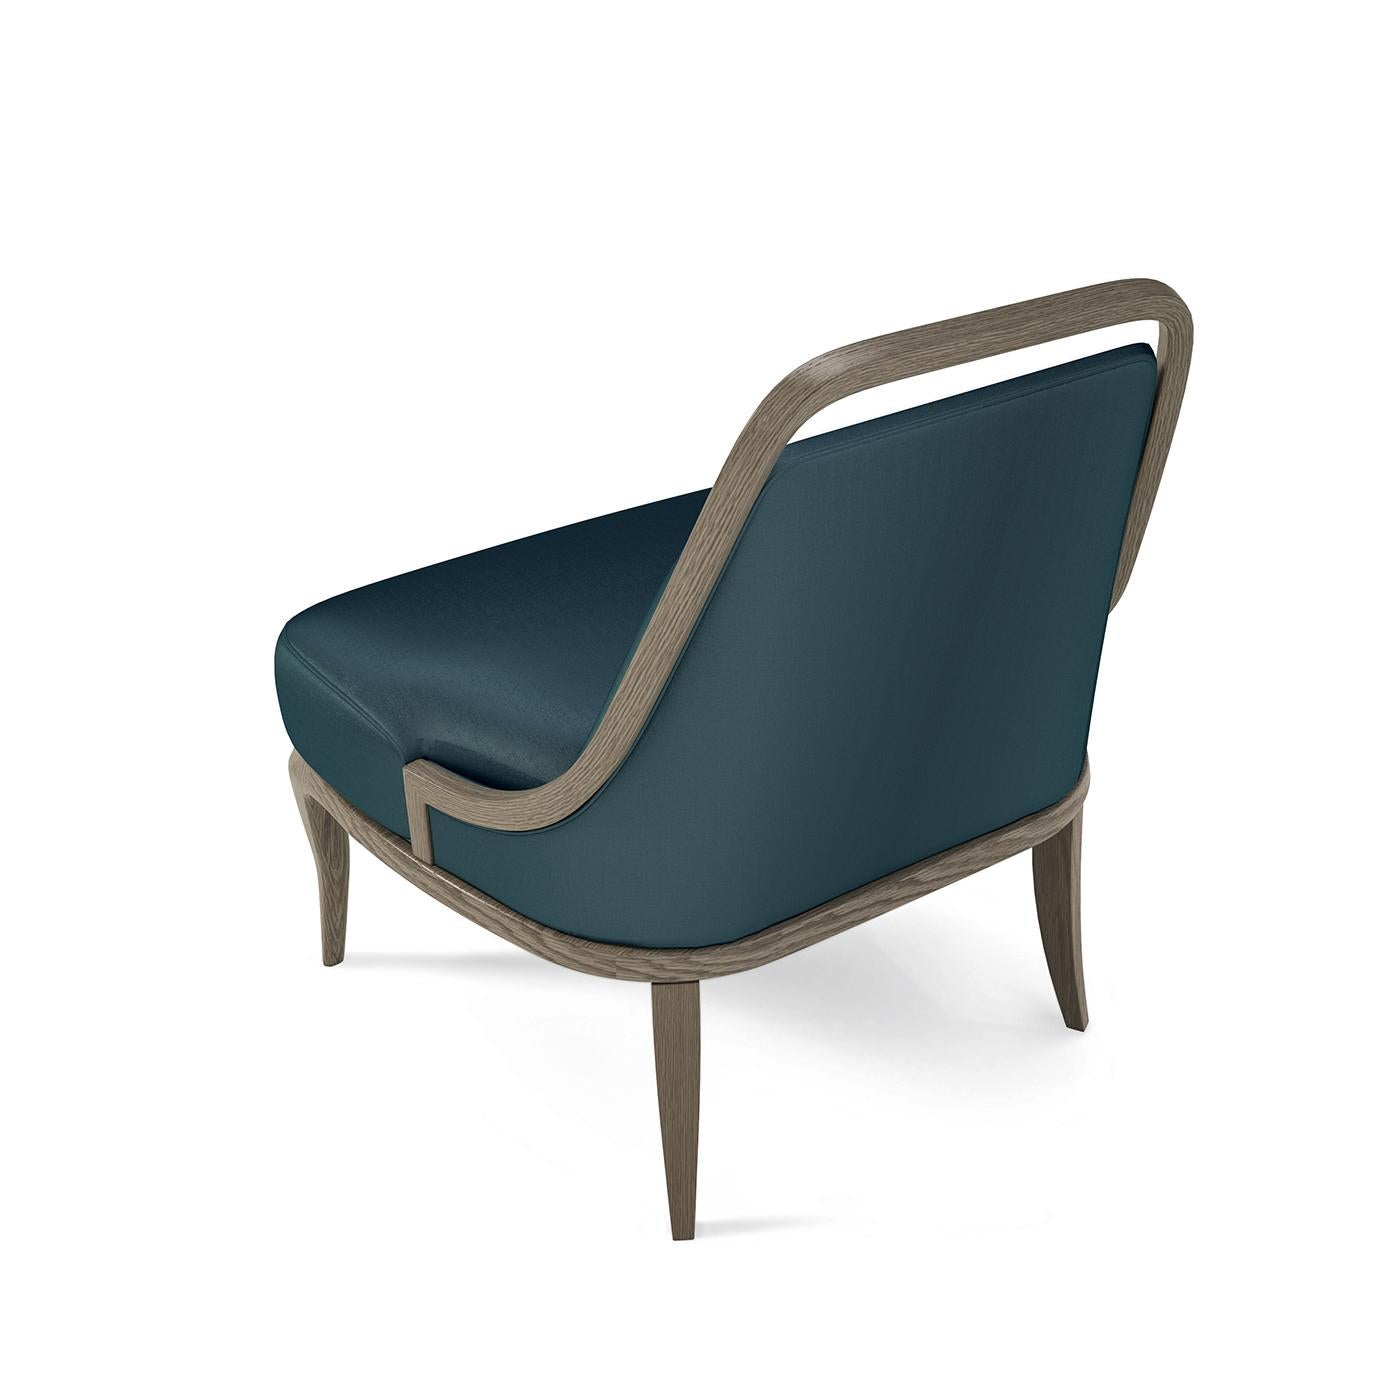 Exuding comfort and sophistication, this armchair is an ingenious piece of functional decor crafted of modern, durable materials. It is composed of an ashwood structure with a tall backrest, padded of polyurethane foam and upholstered of bright